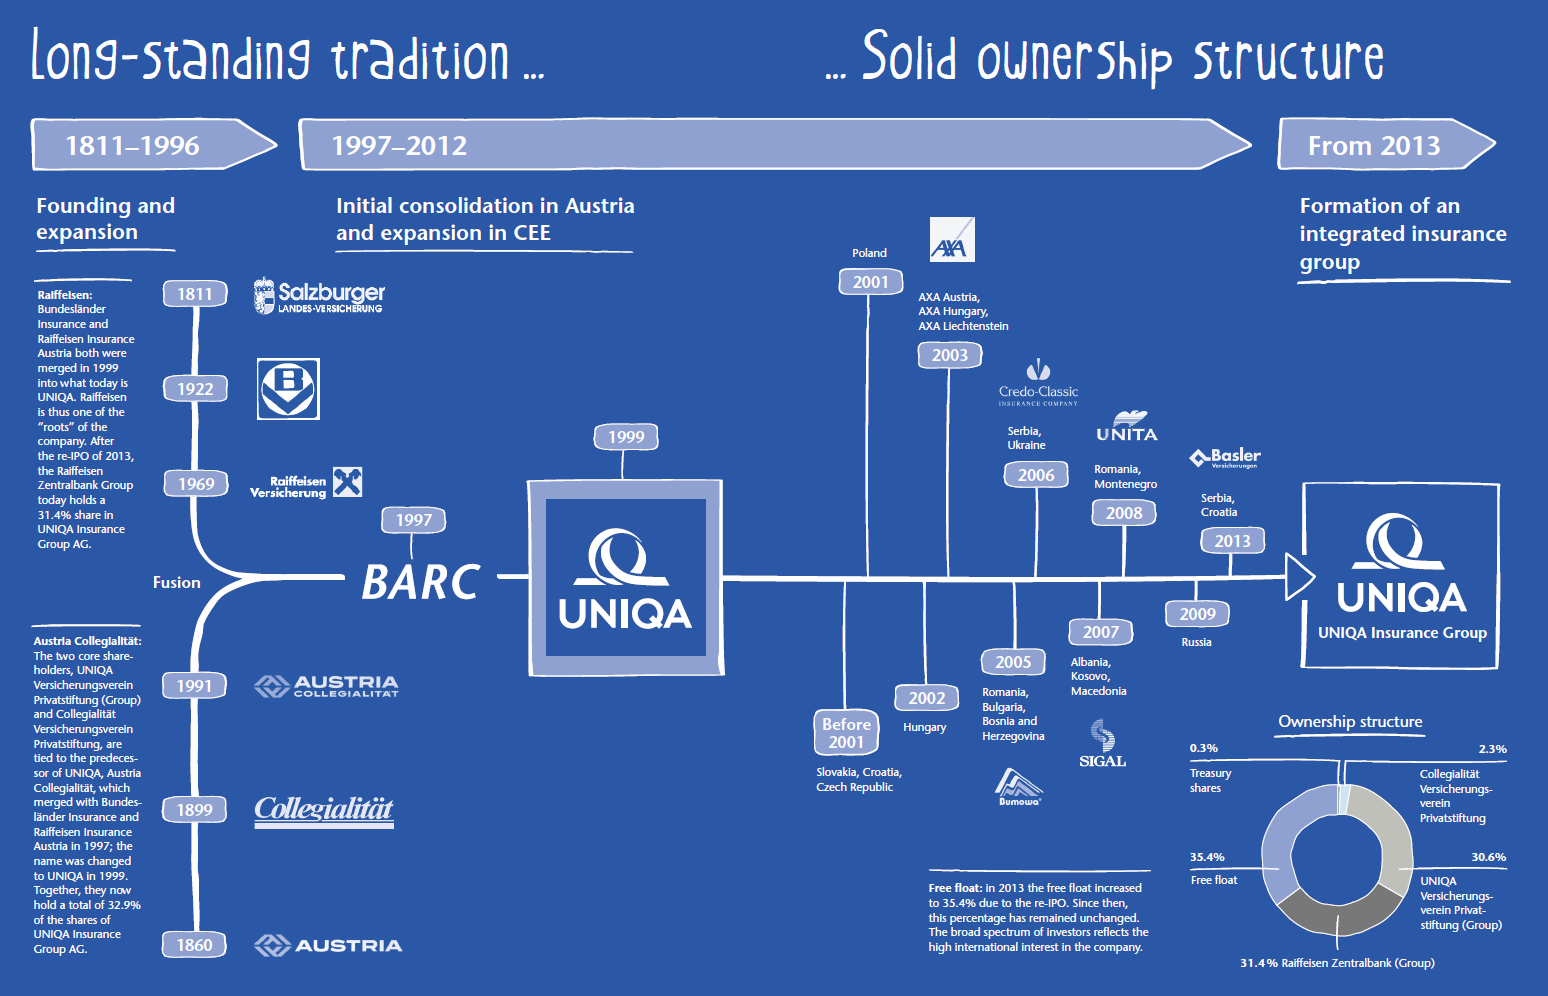 Long-standing tradition – Solid ownership structure (graphic)